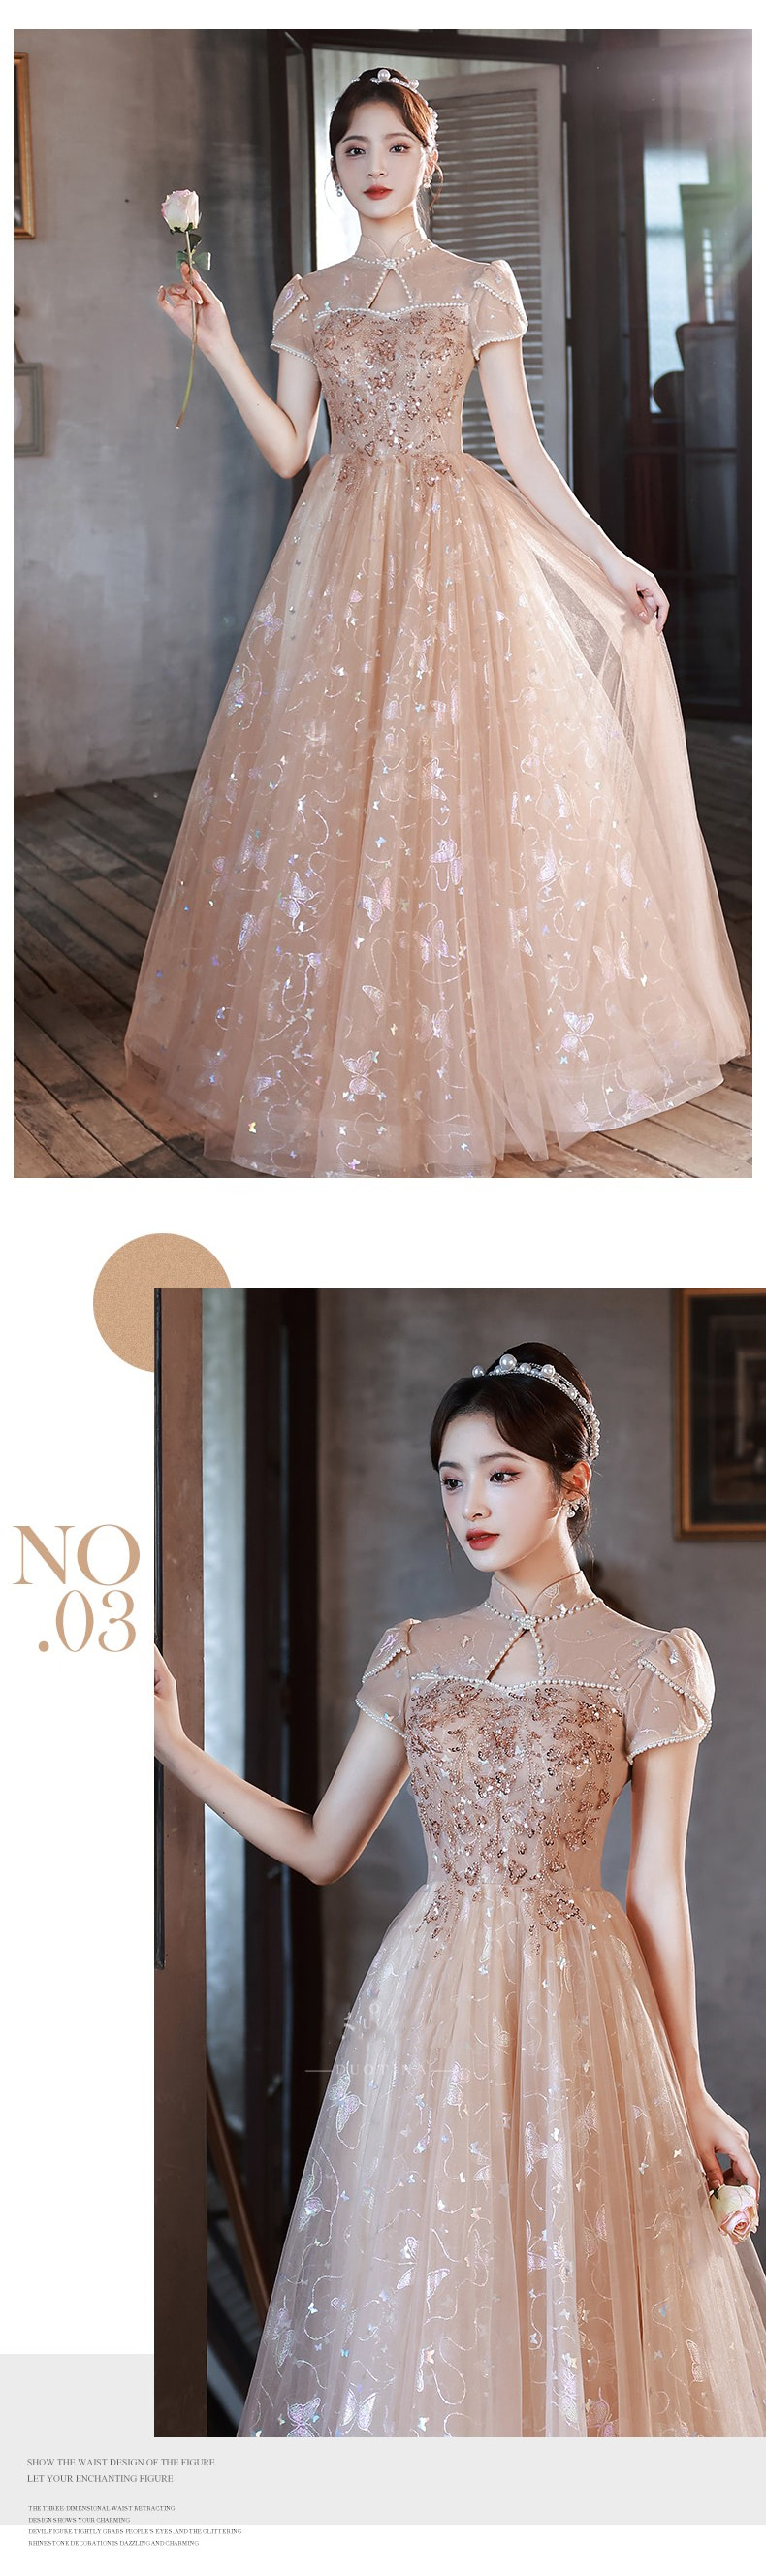 Aesthetic-Party-Outfit-Charming-Formal-Prom-Banquet-Long-Dress11.jpg